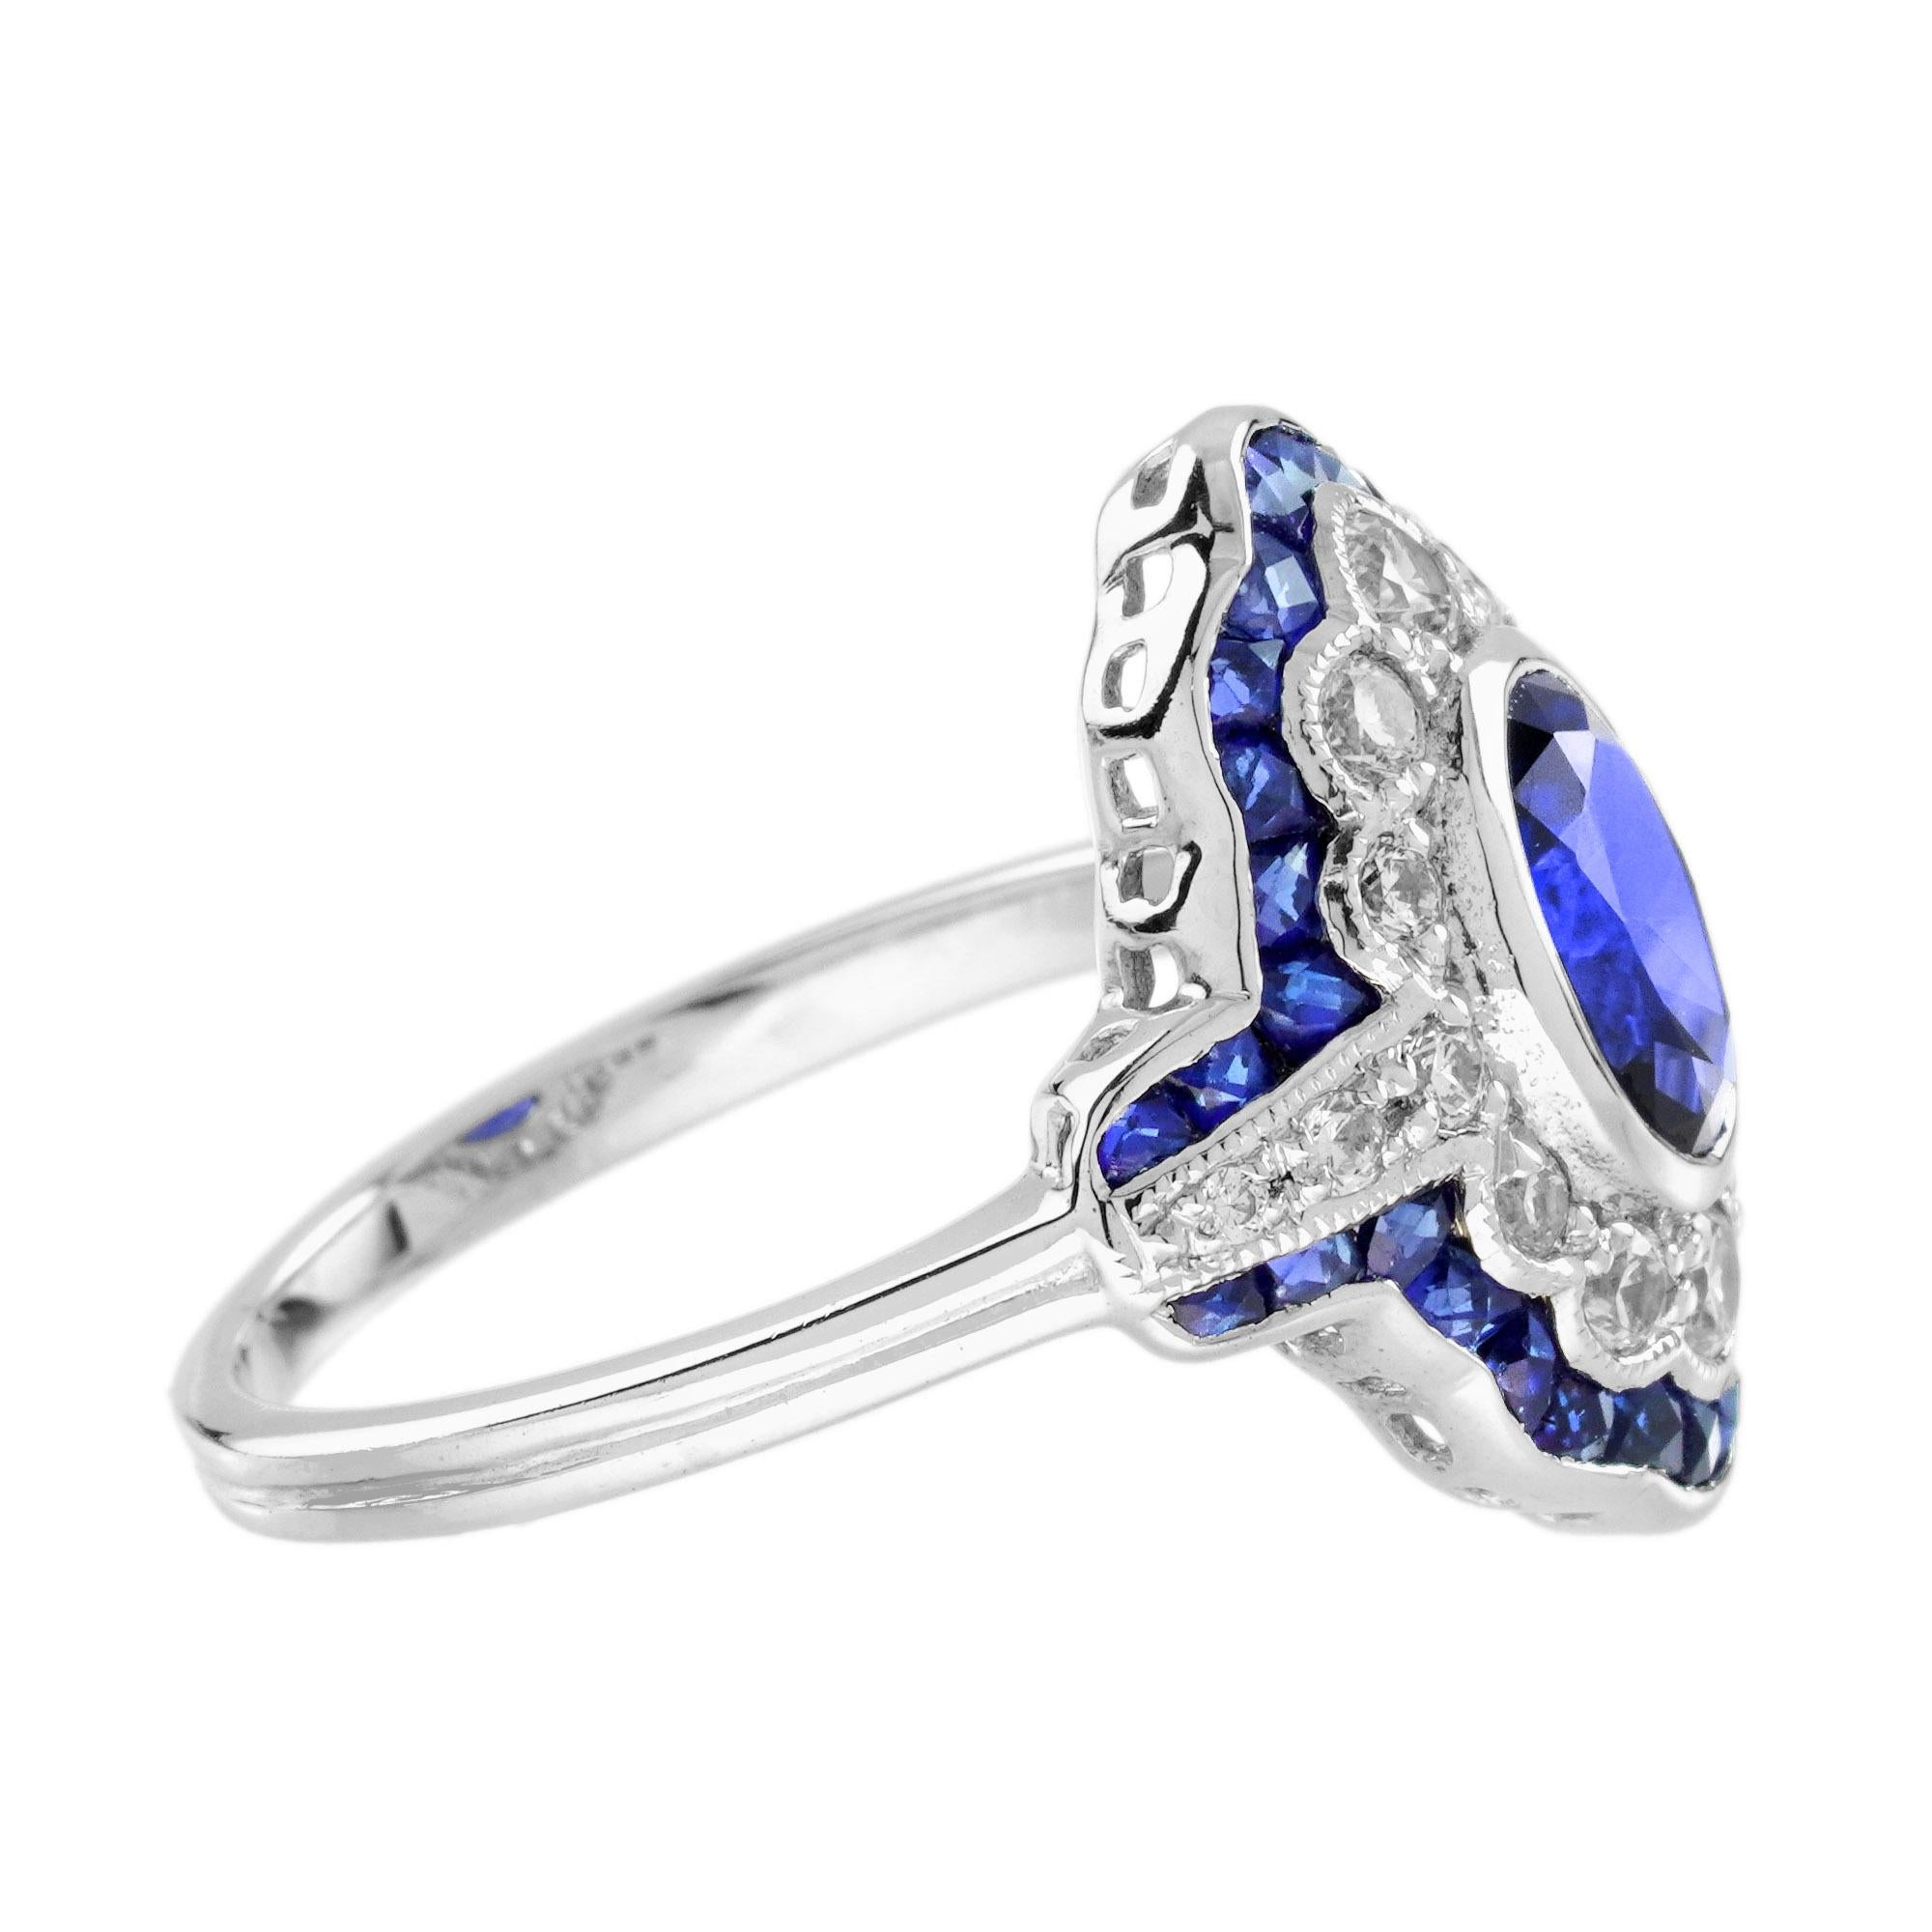 1.6 Ct. Ceylon Sapphire Diamond Art Deco Style Engagement Ring in 18K White Gold In New Condition For Sale In Bangkok, TH